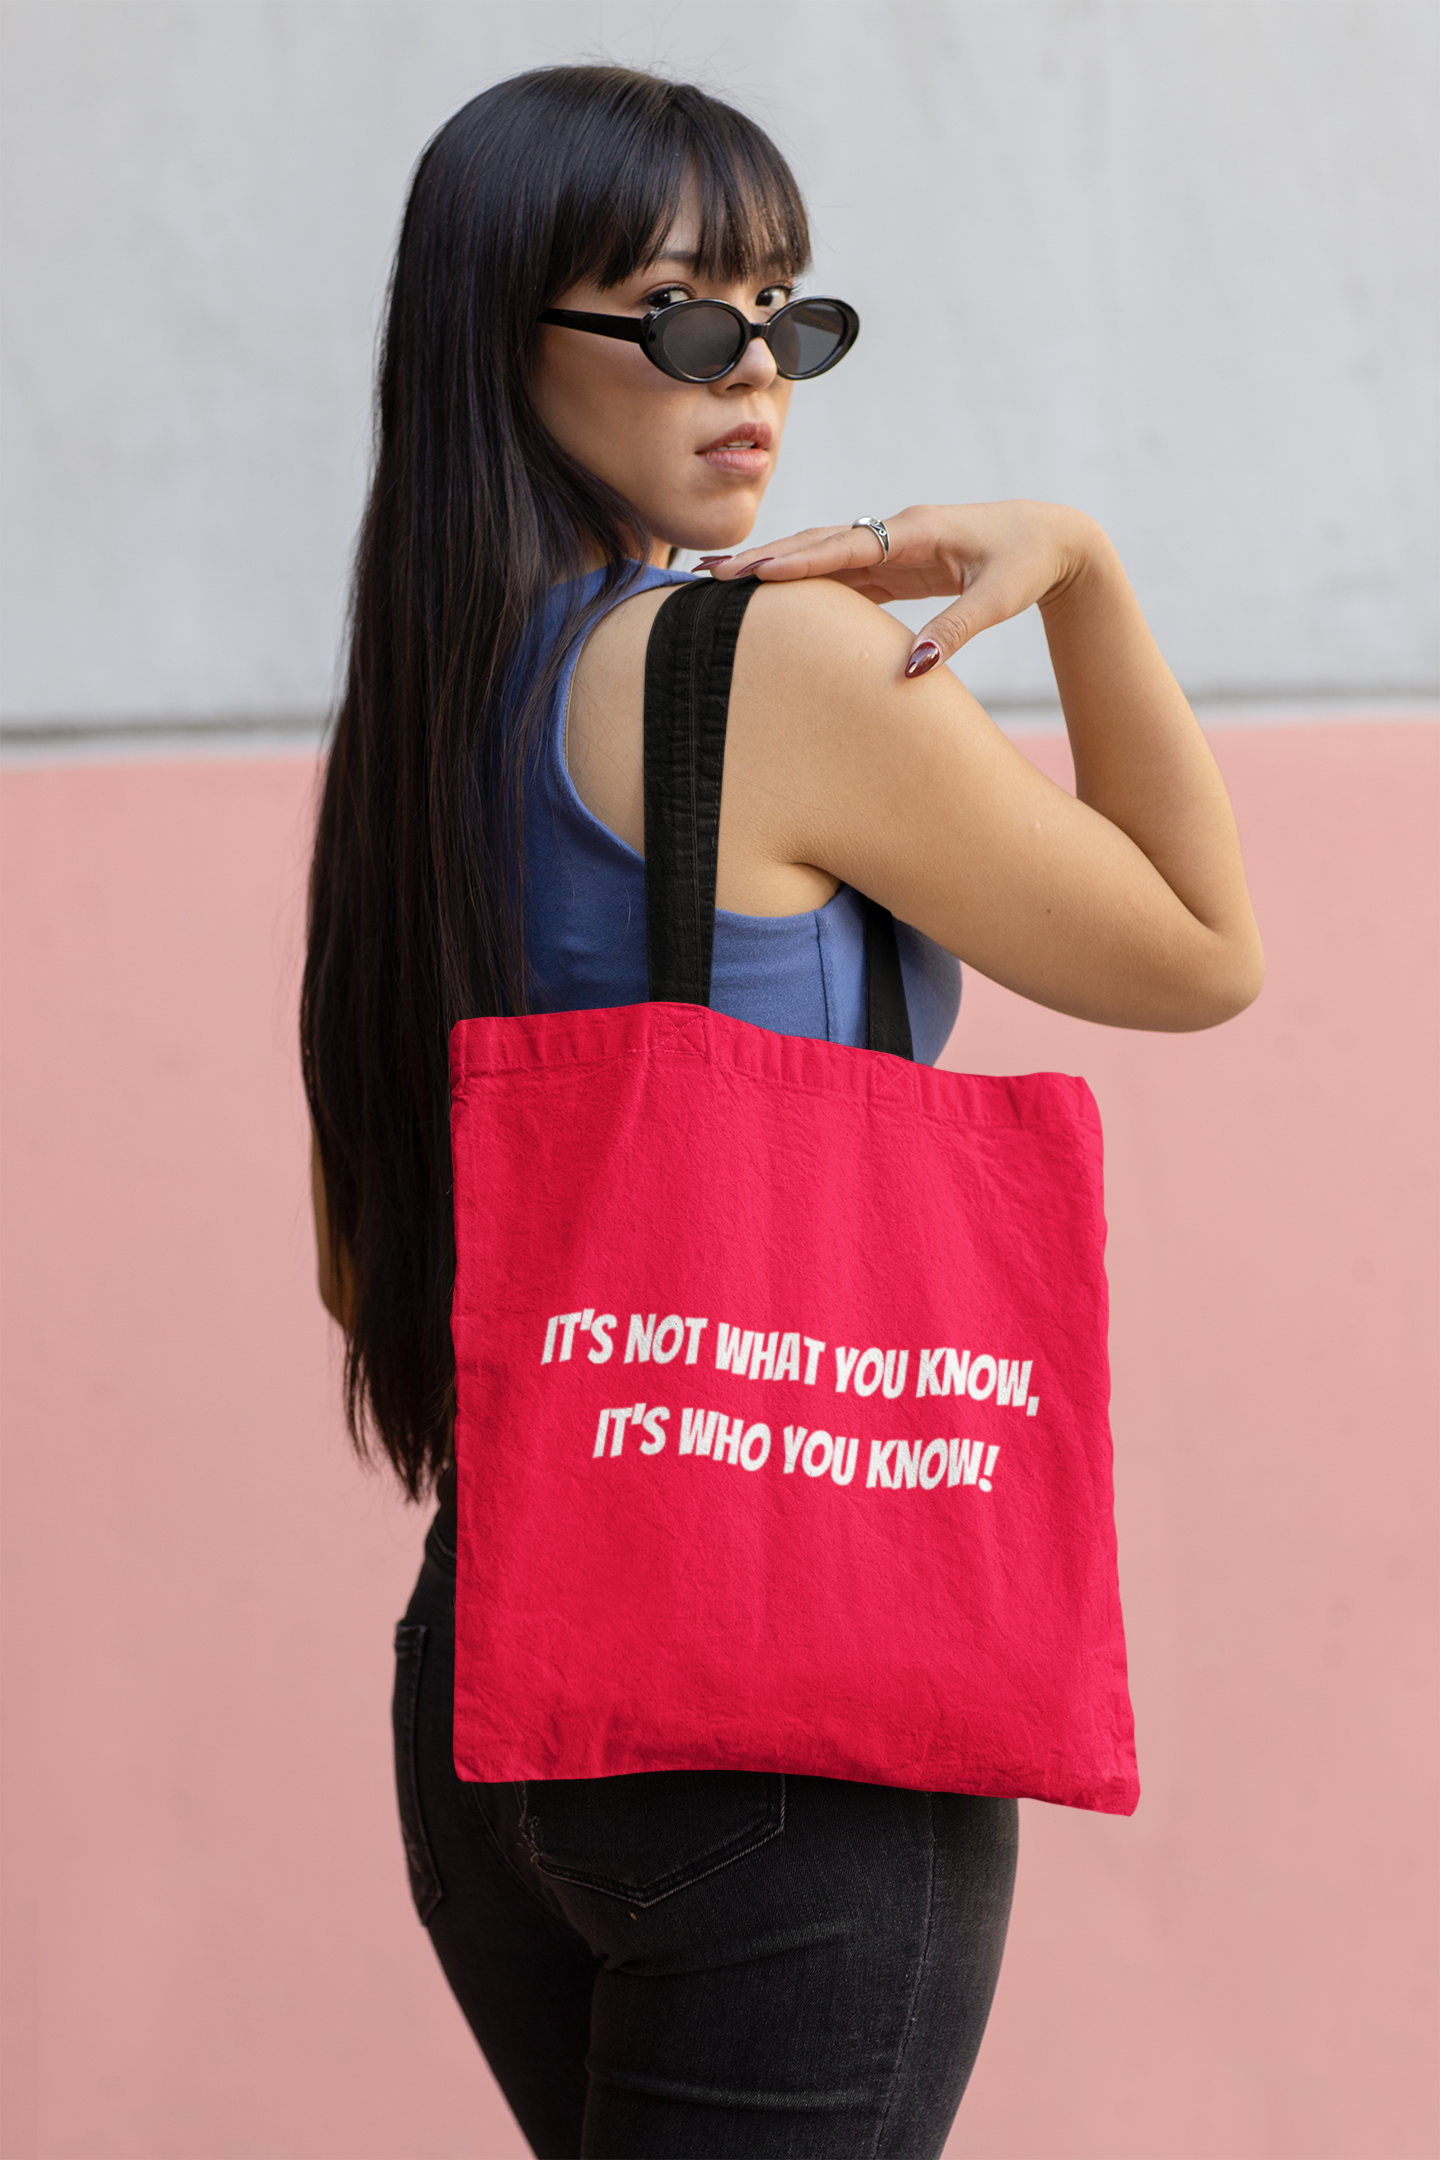 A beautiful Asian woman wearing a sleeveless top is looking over her shoulder toward the viewer. She is carrying a torch red canvas shopping tote with black handles. On the side of the tote reads It's not what you know, It's who you know! in white letters.